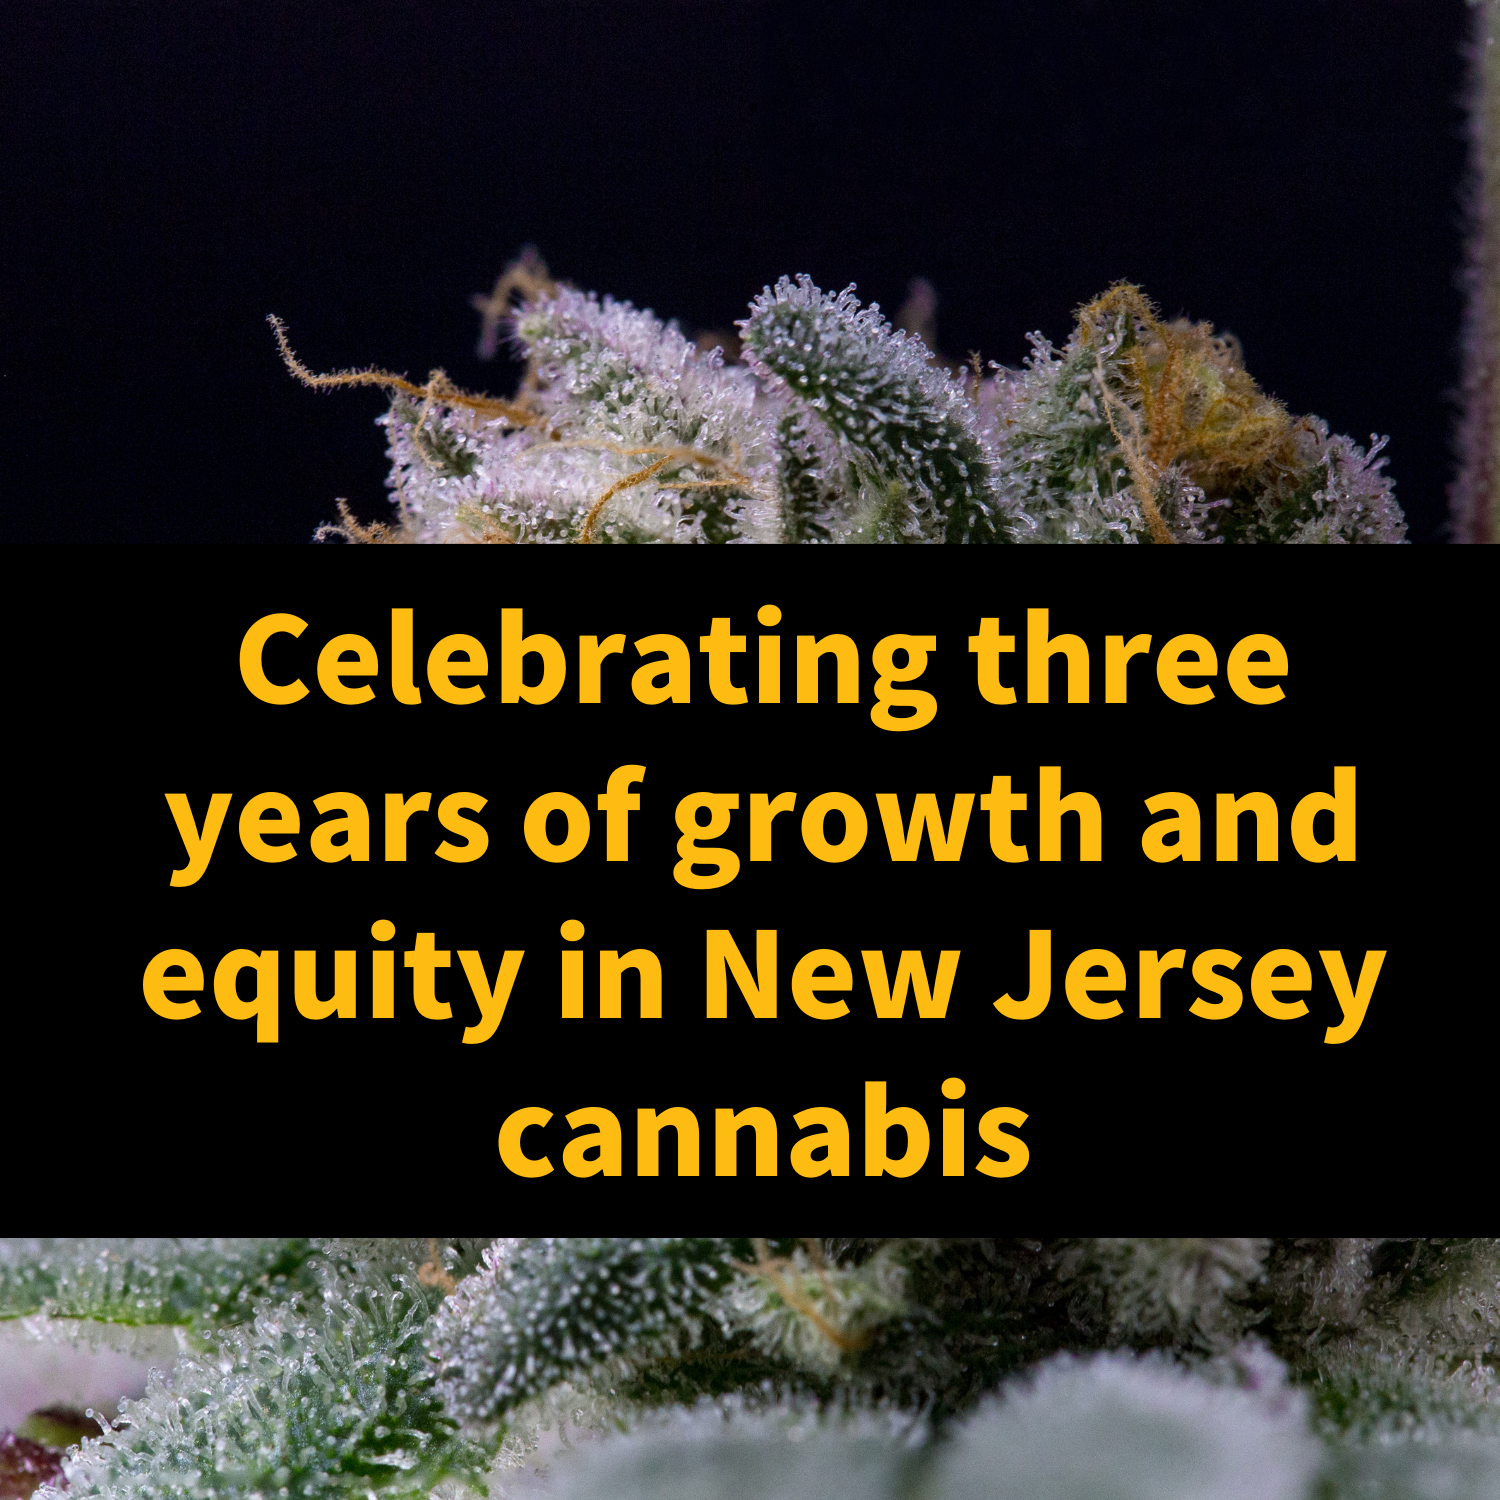 Celebrating three years of growth and equity in NJ cannabis